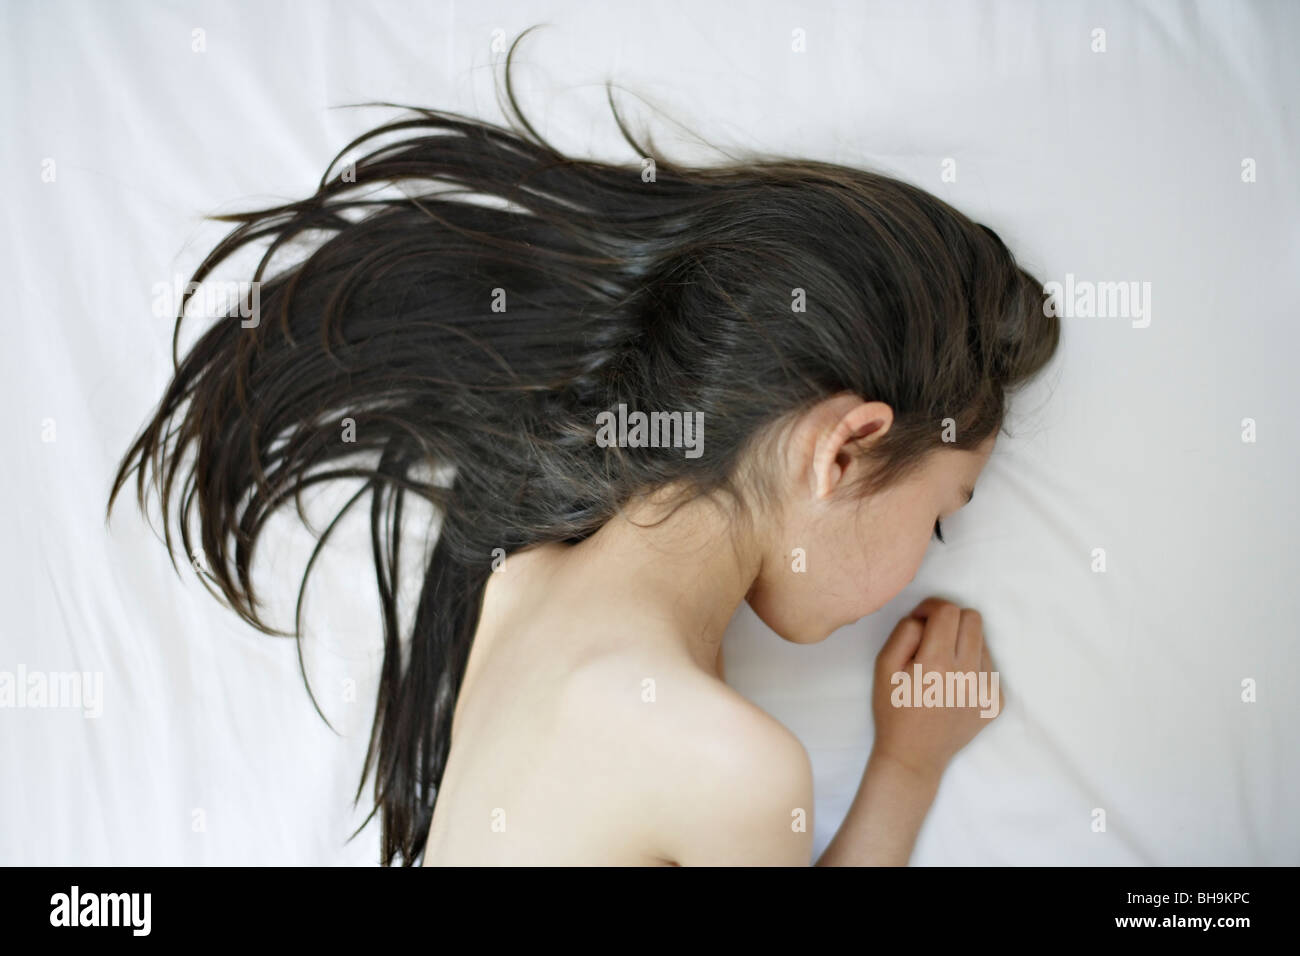 Six year old girl lies on bed Stock Photo